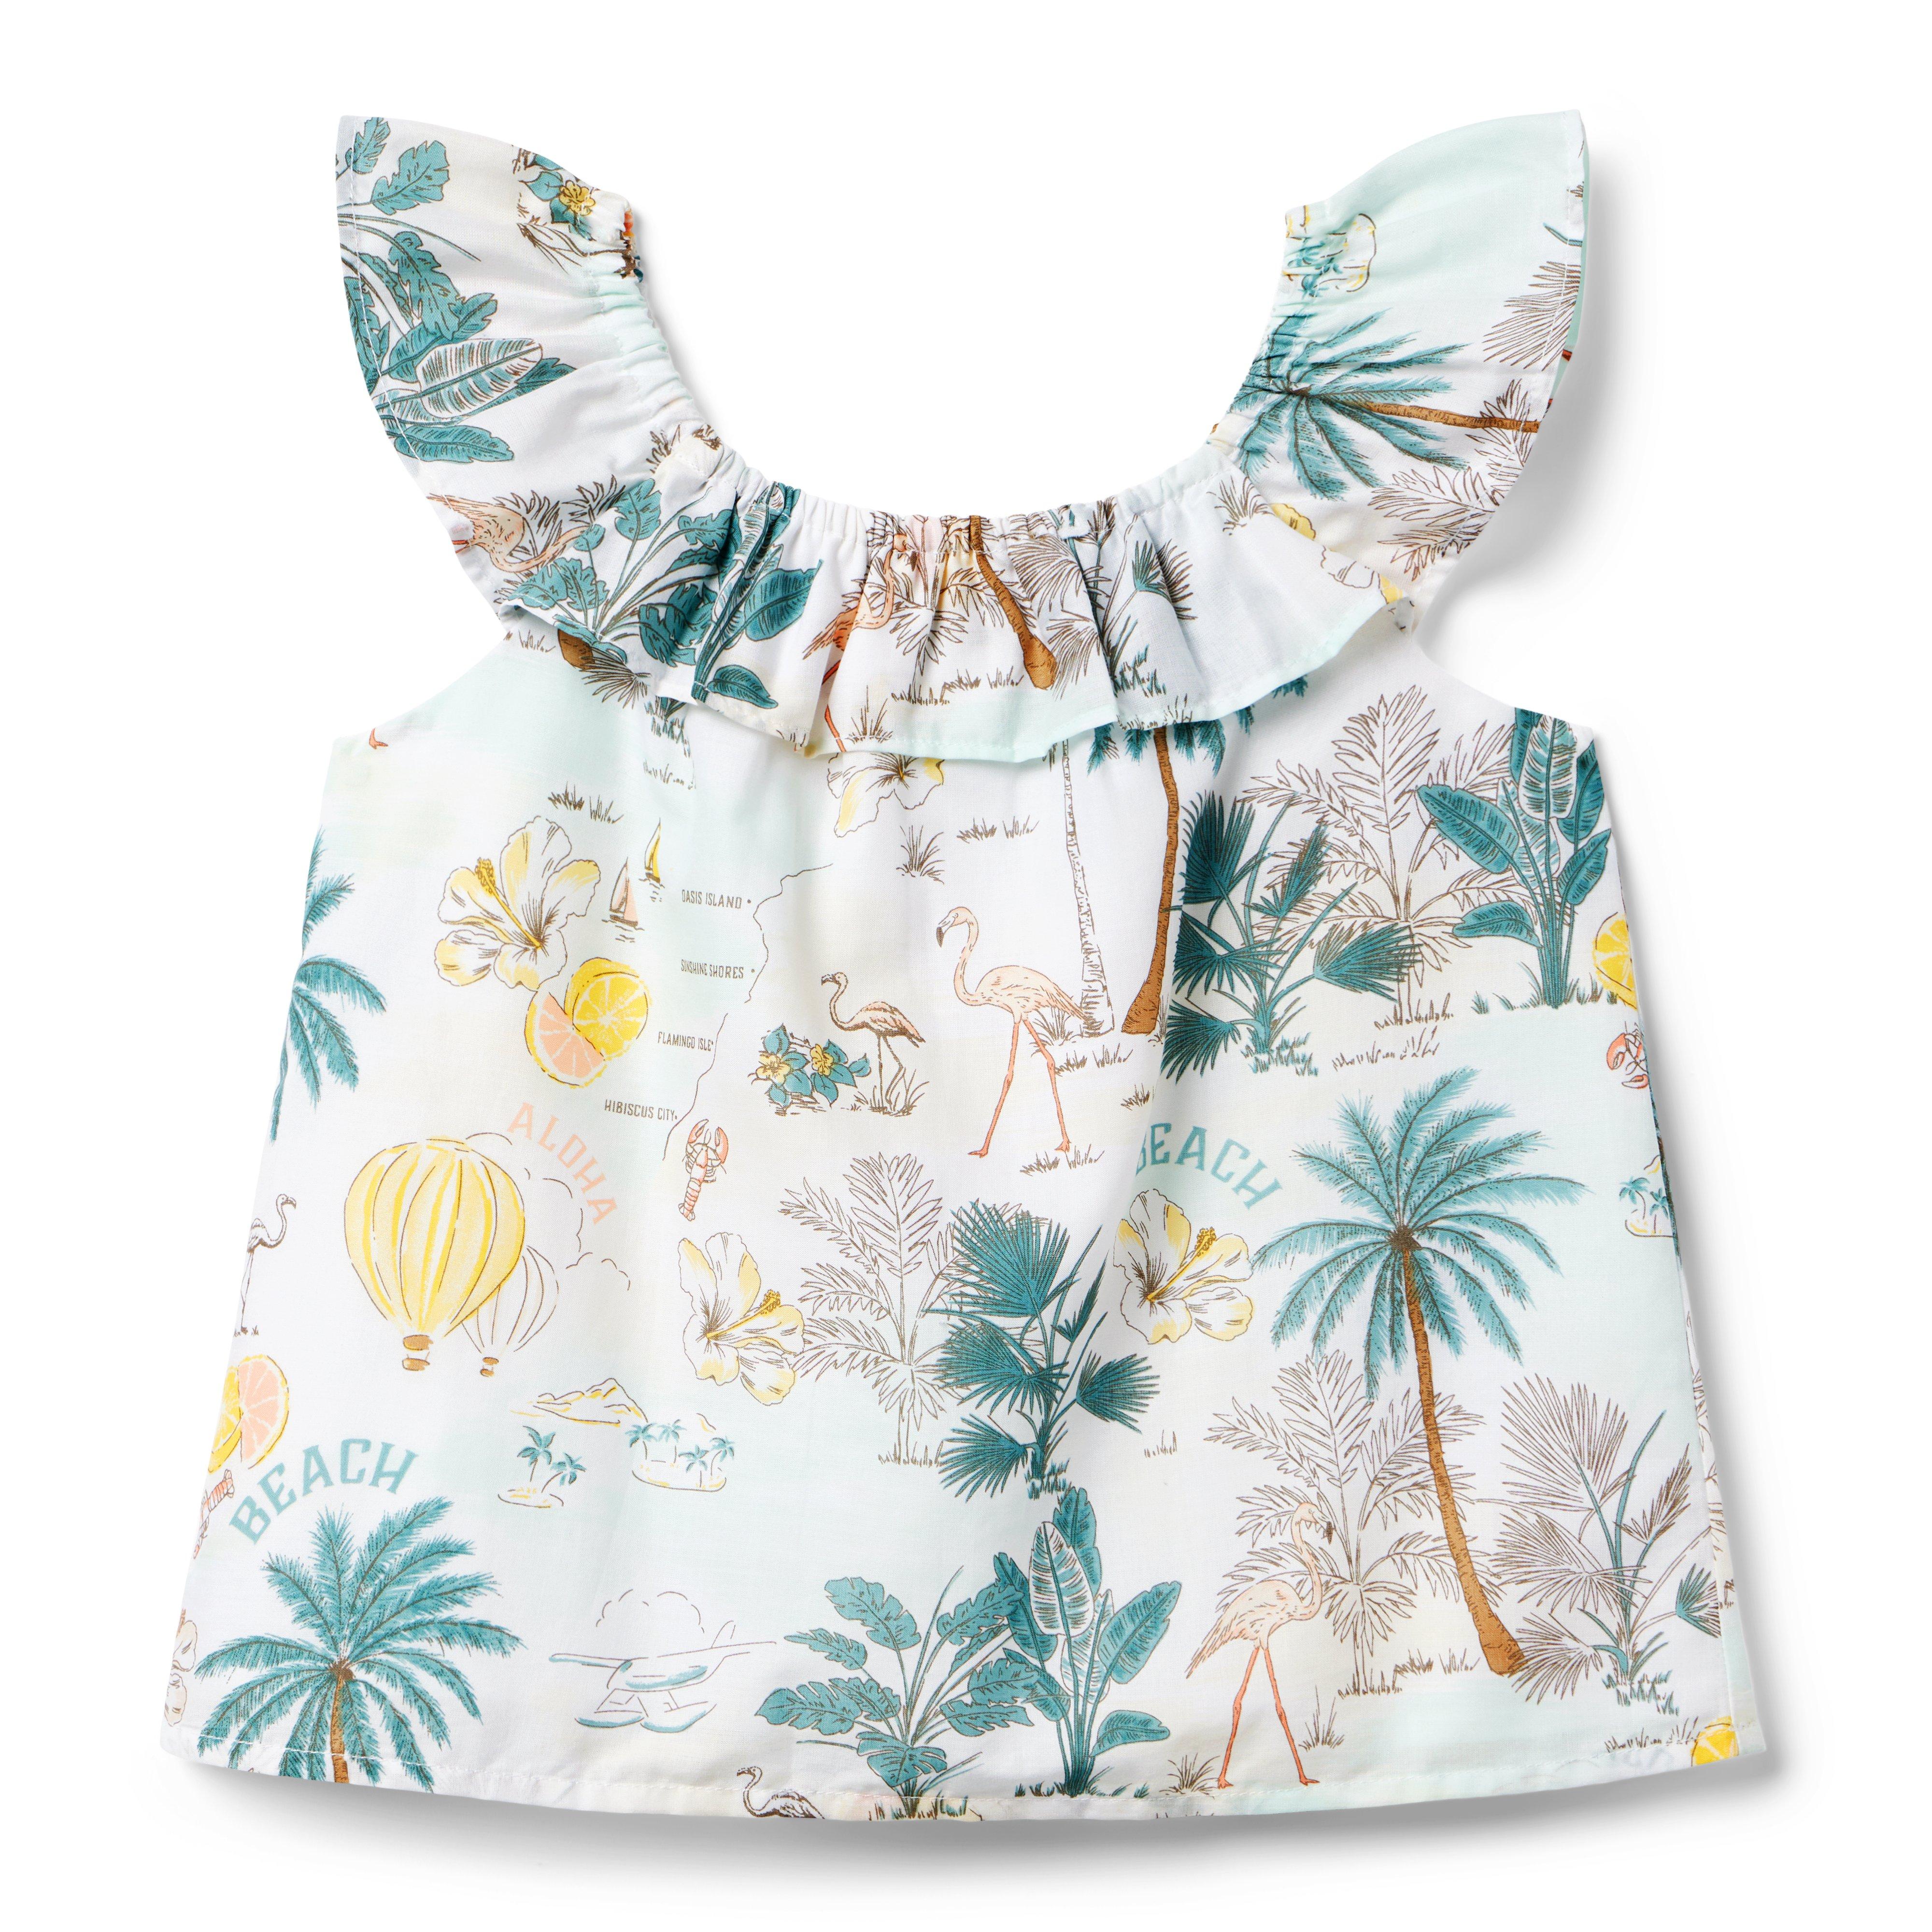 Tropical Island Ruffle Top image number 0